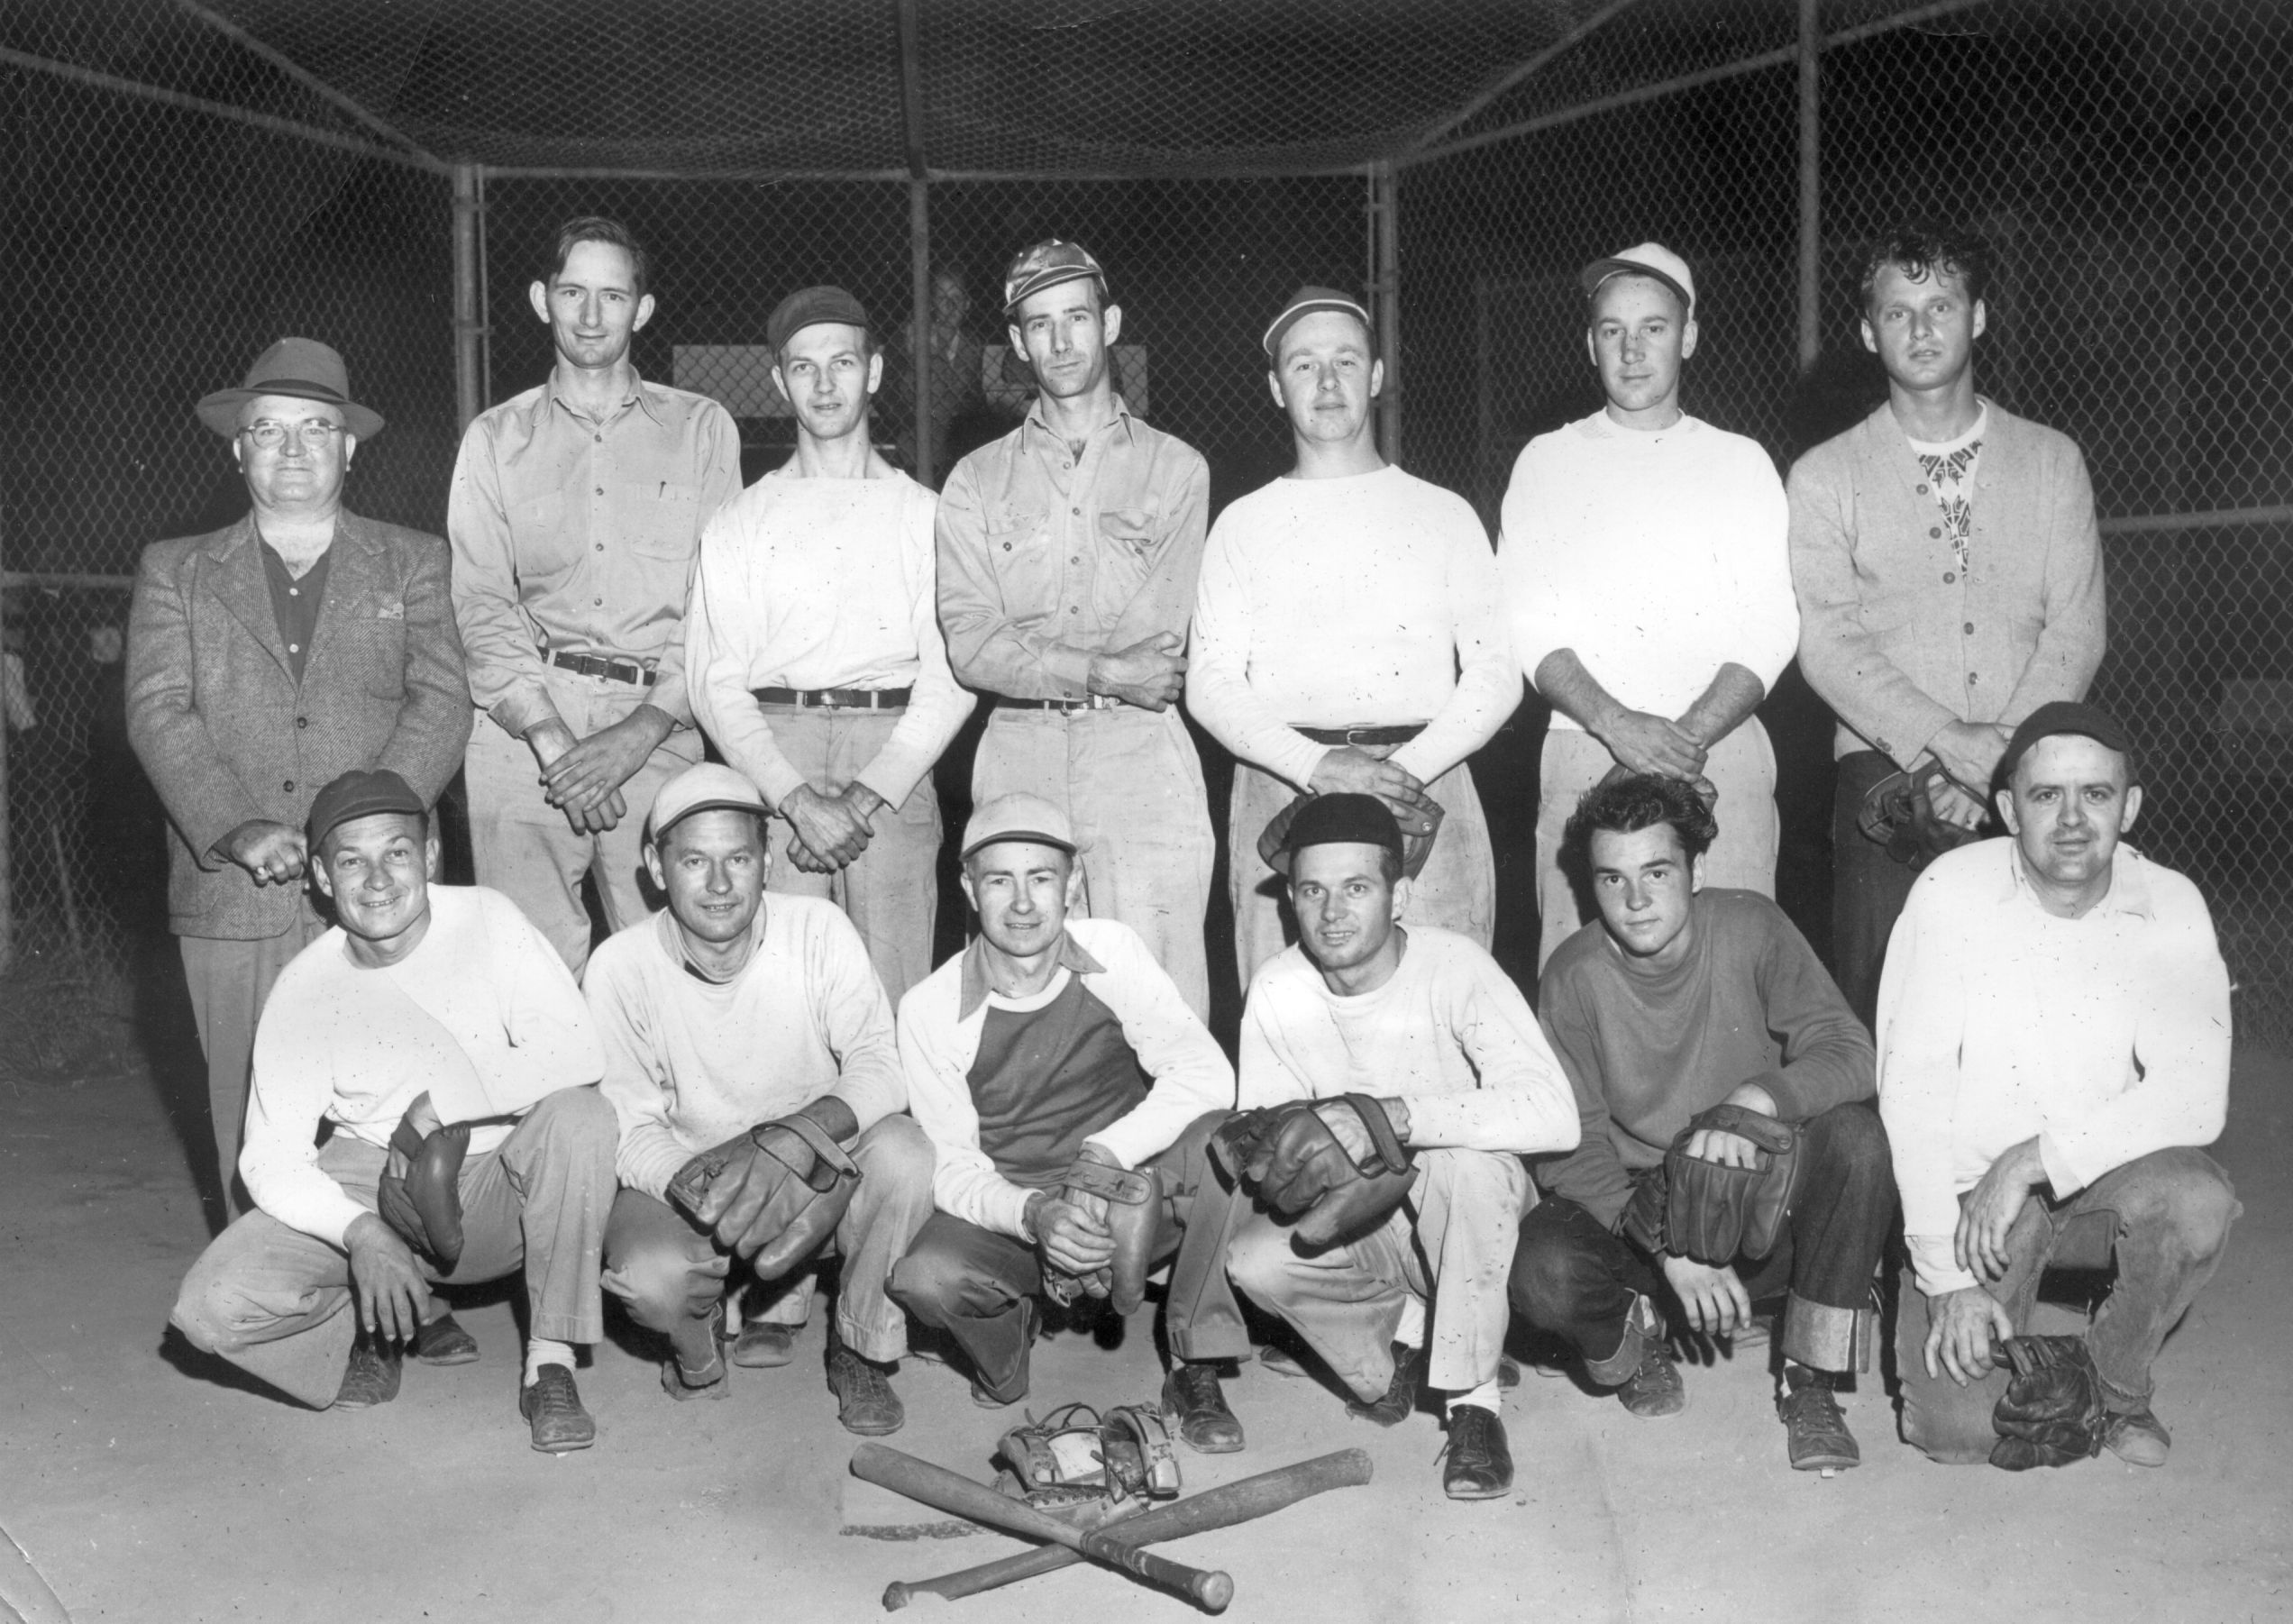 Another baseball team my grandpa played with during the 1940's. He is 2nd from left on the bottom row. The guy to his right is also in the other baseball team picture. View full size.